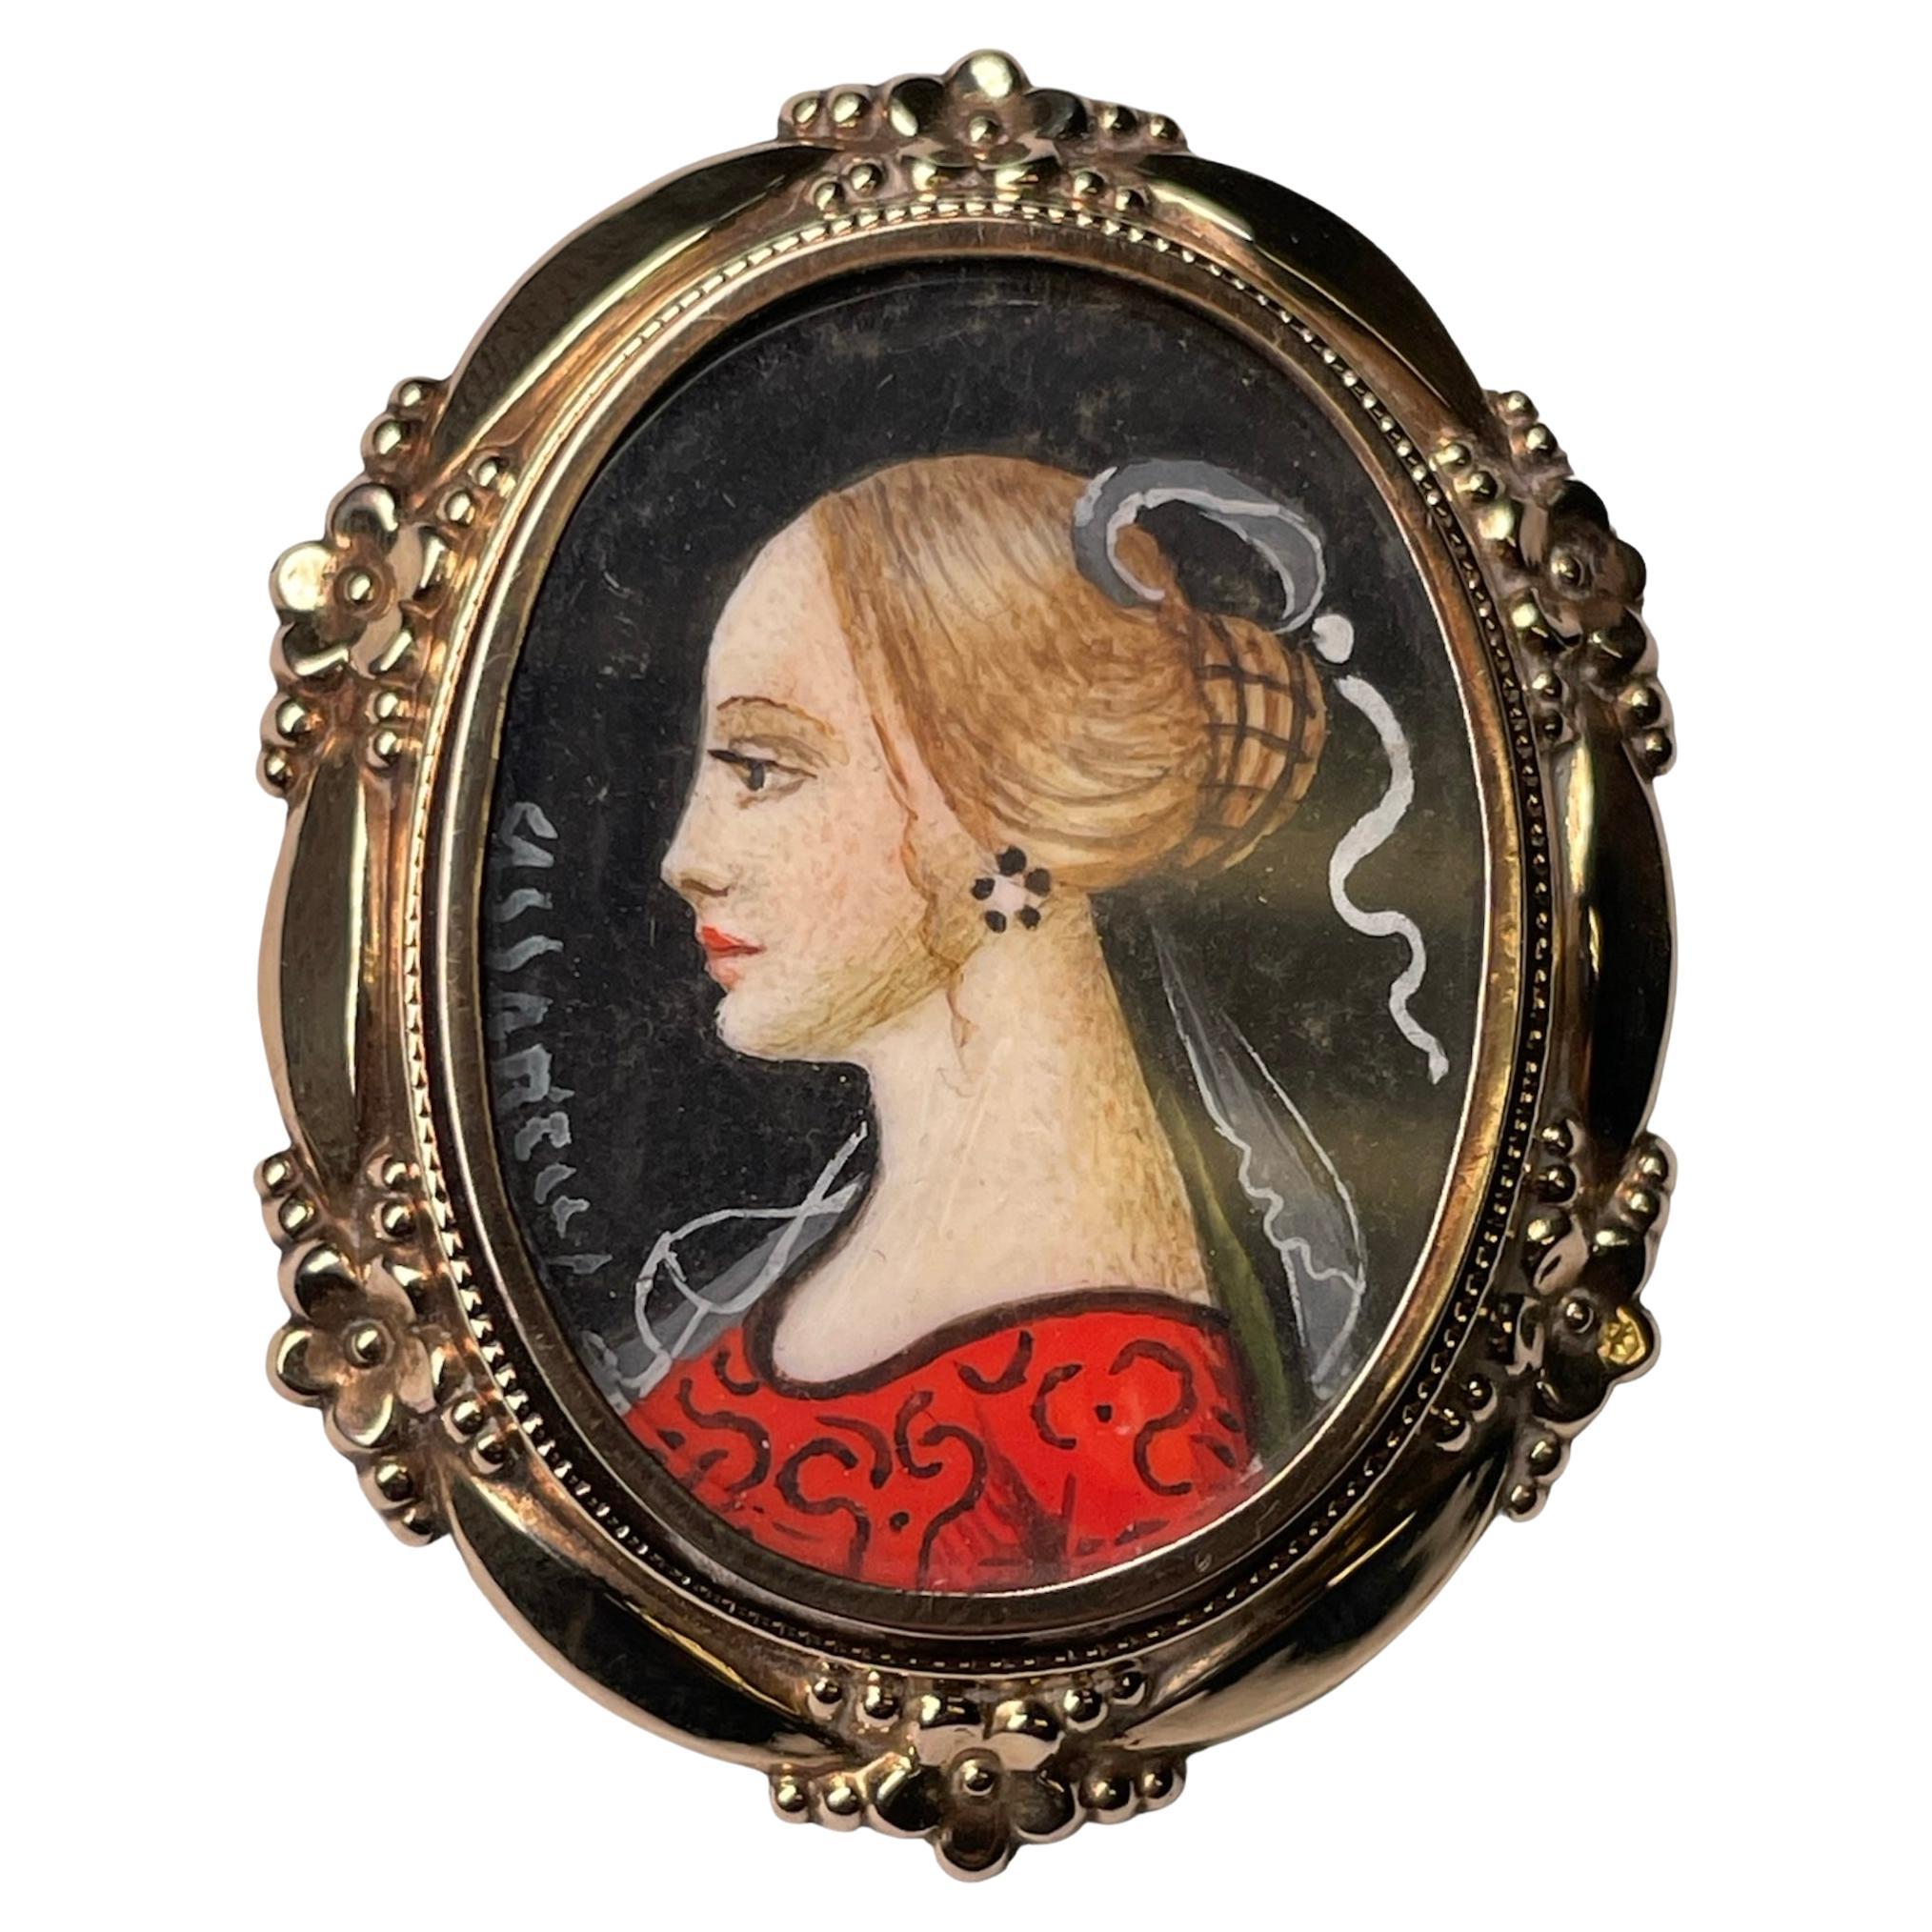  Gold Hand Painted Miniature Lady Portrait Brooch